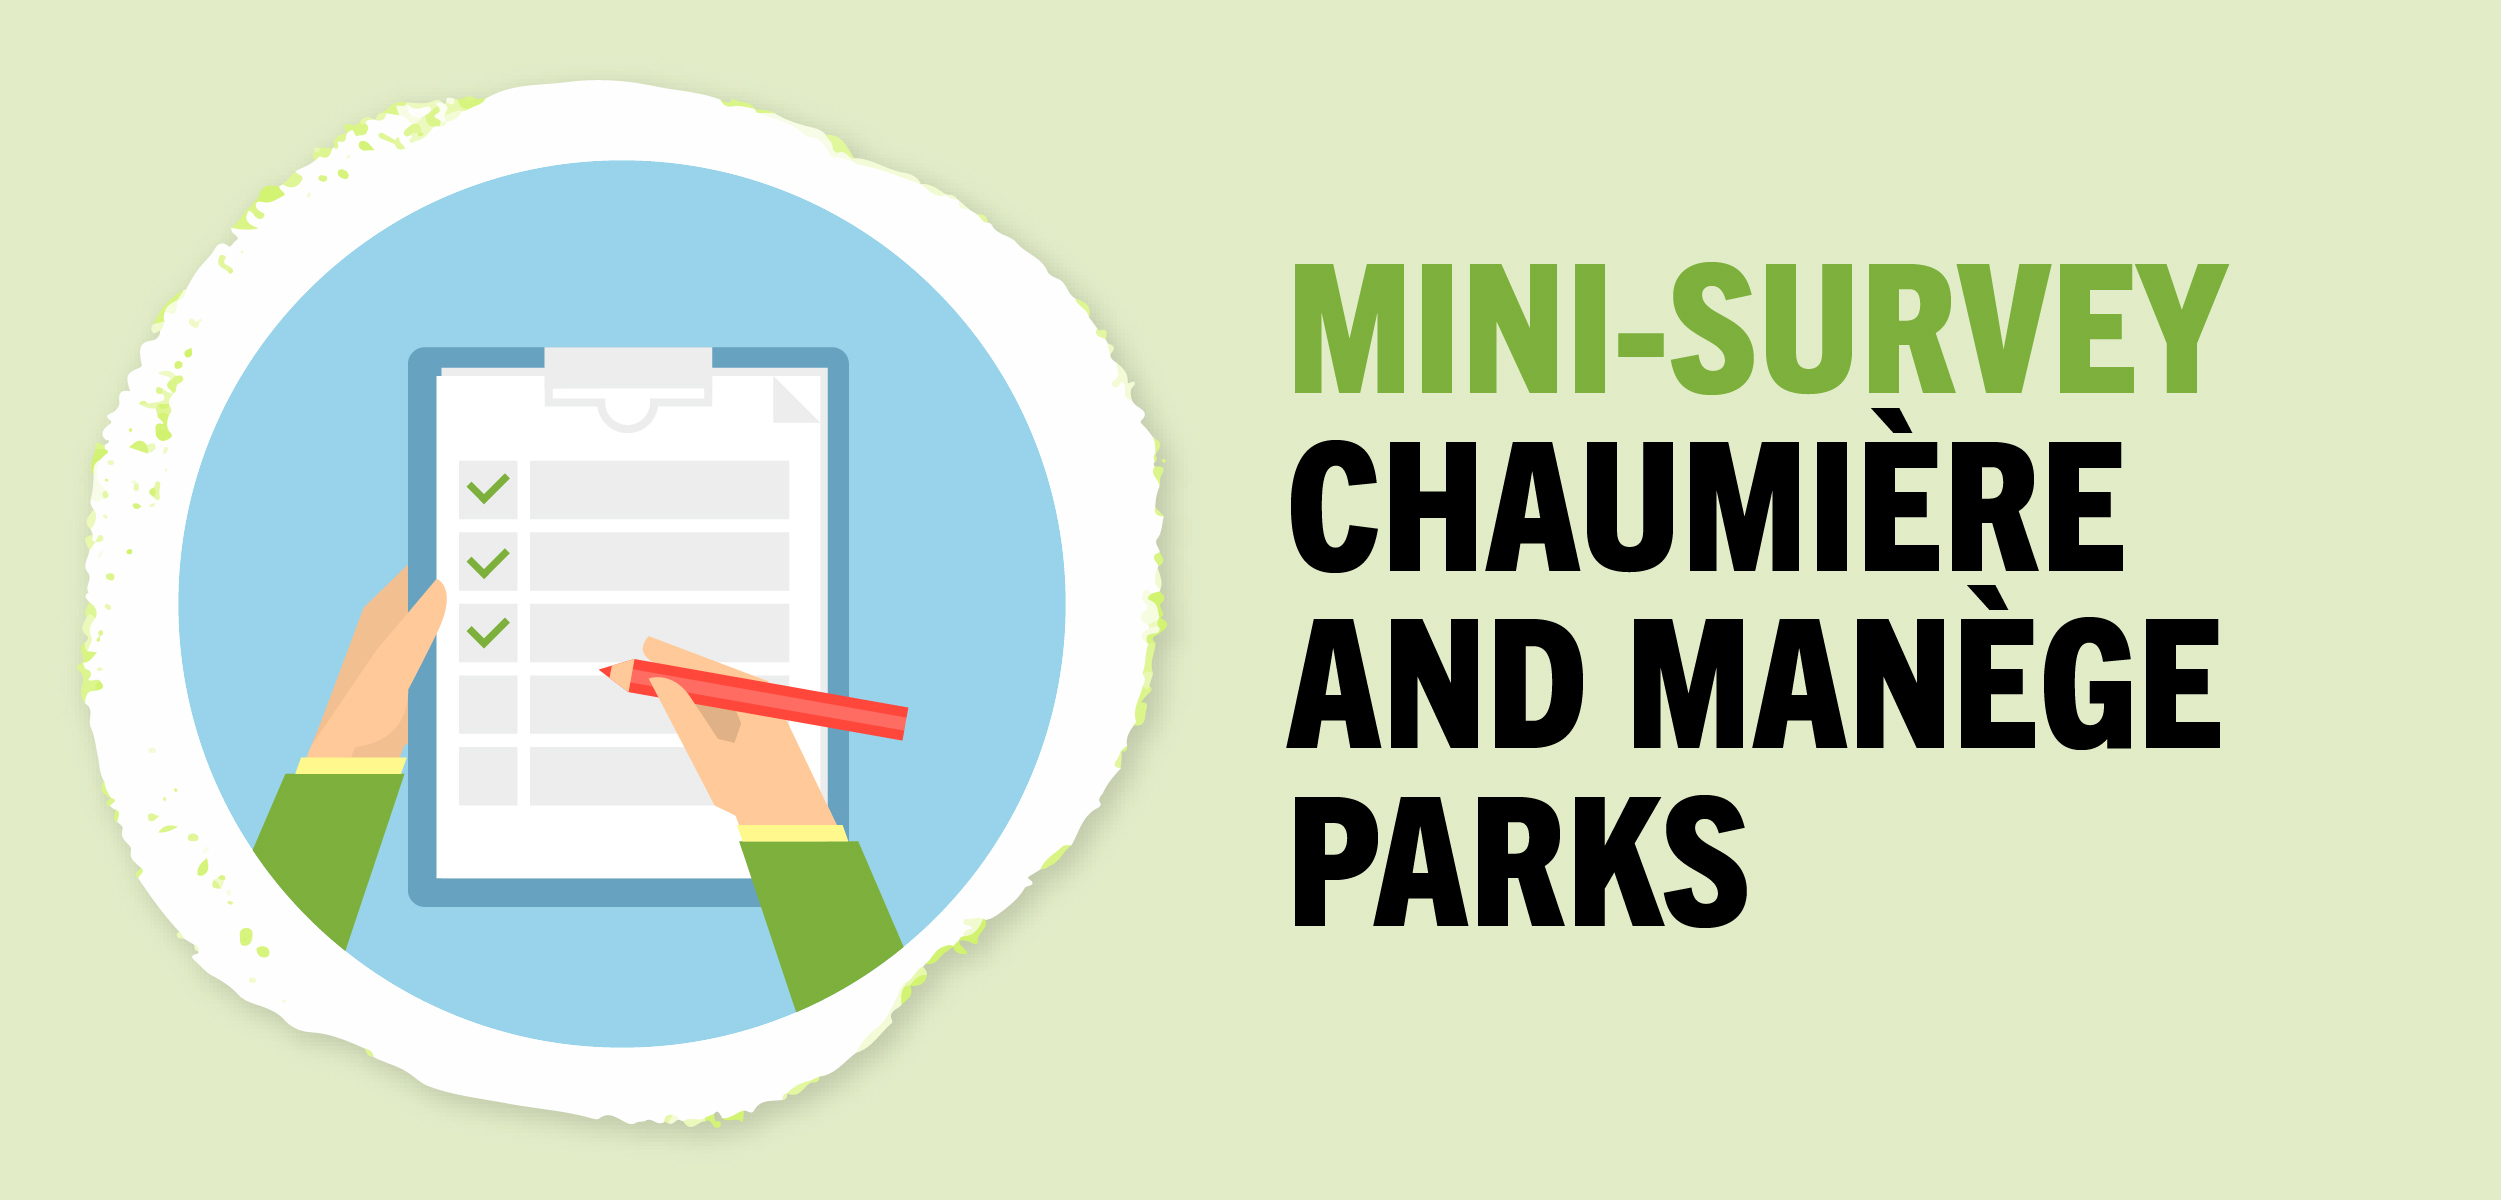 You are currently viewing Mini-survey Chaumière and Manège parks